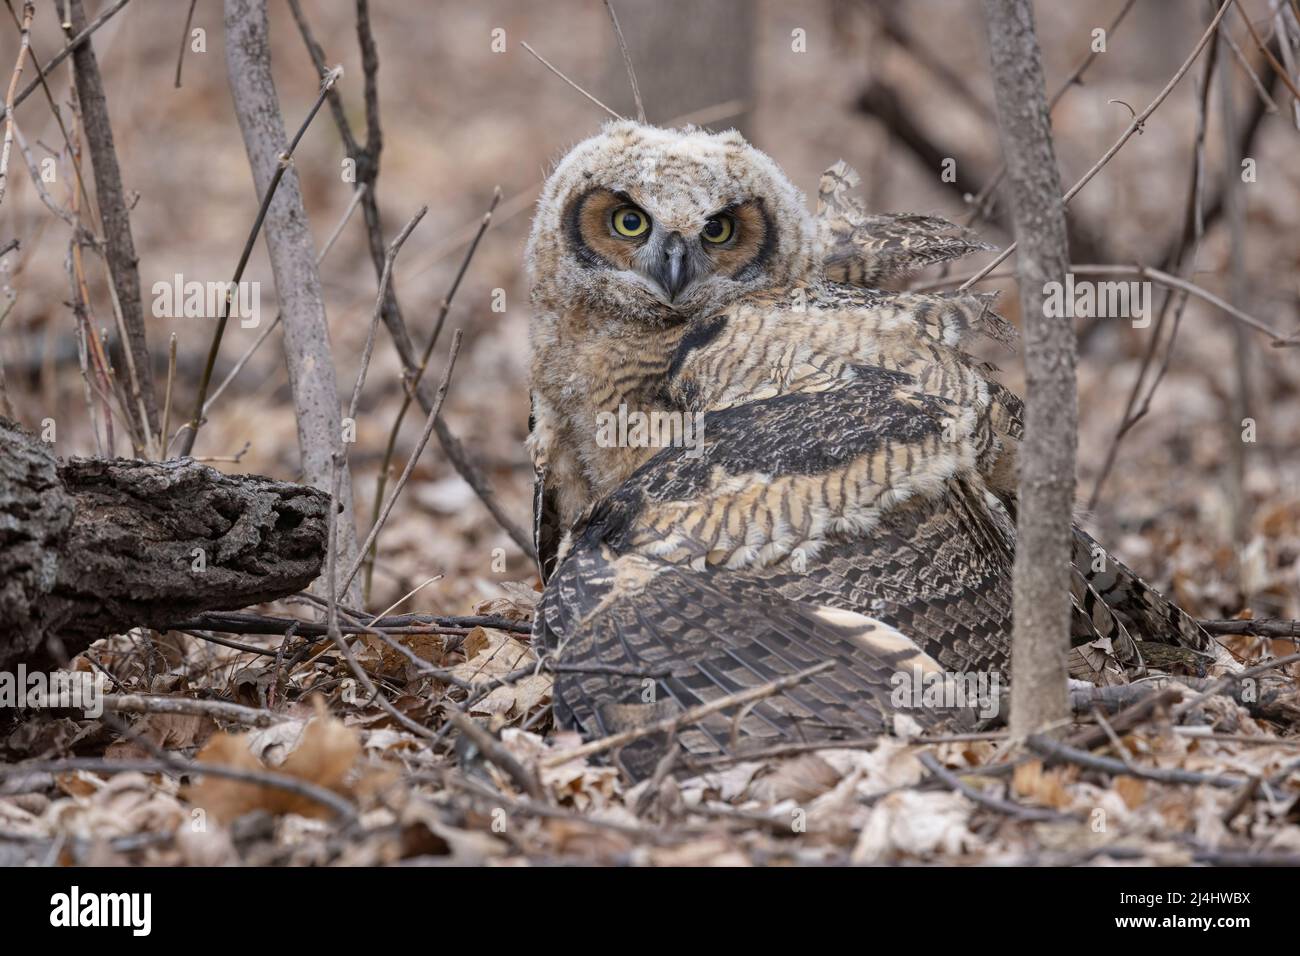 Great Horned Owl (Bubo virginianus), owlet suffering from Highly Pathogenic Avian Influenza (HPAI). This owlet was euthanized along with a sibling. Stock Photo